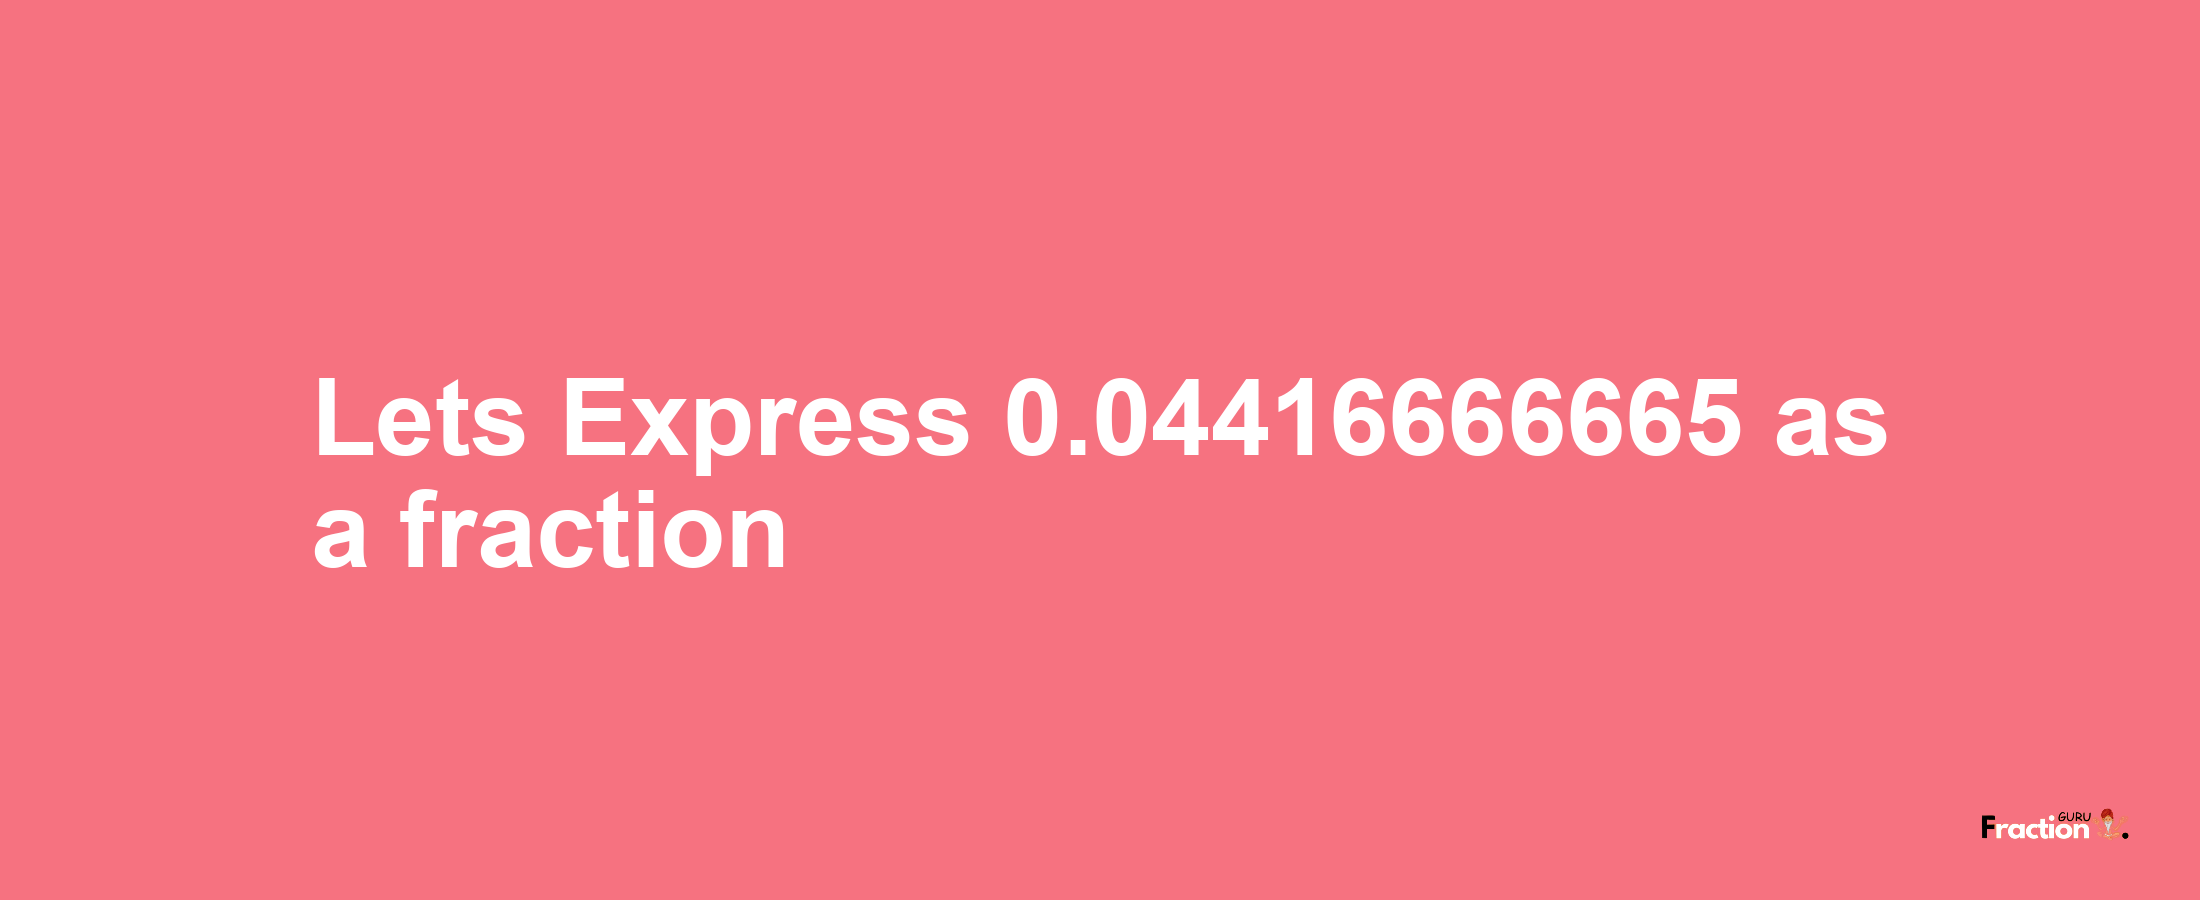 Lets Express 0.04416666665 as afraction